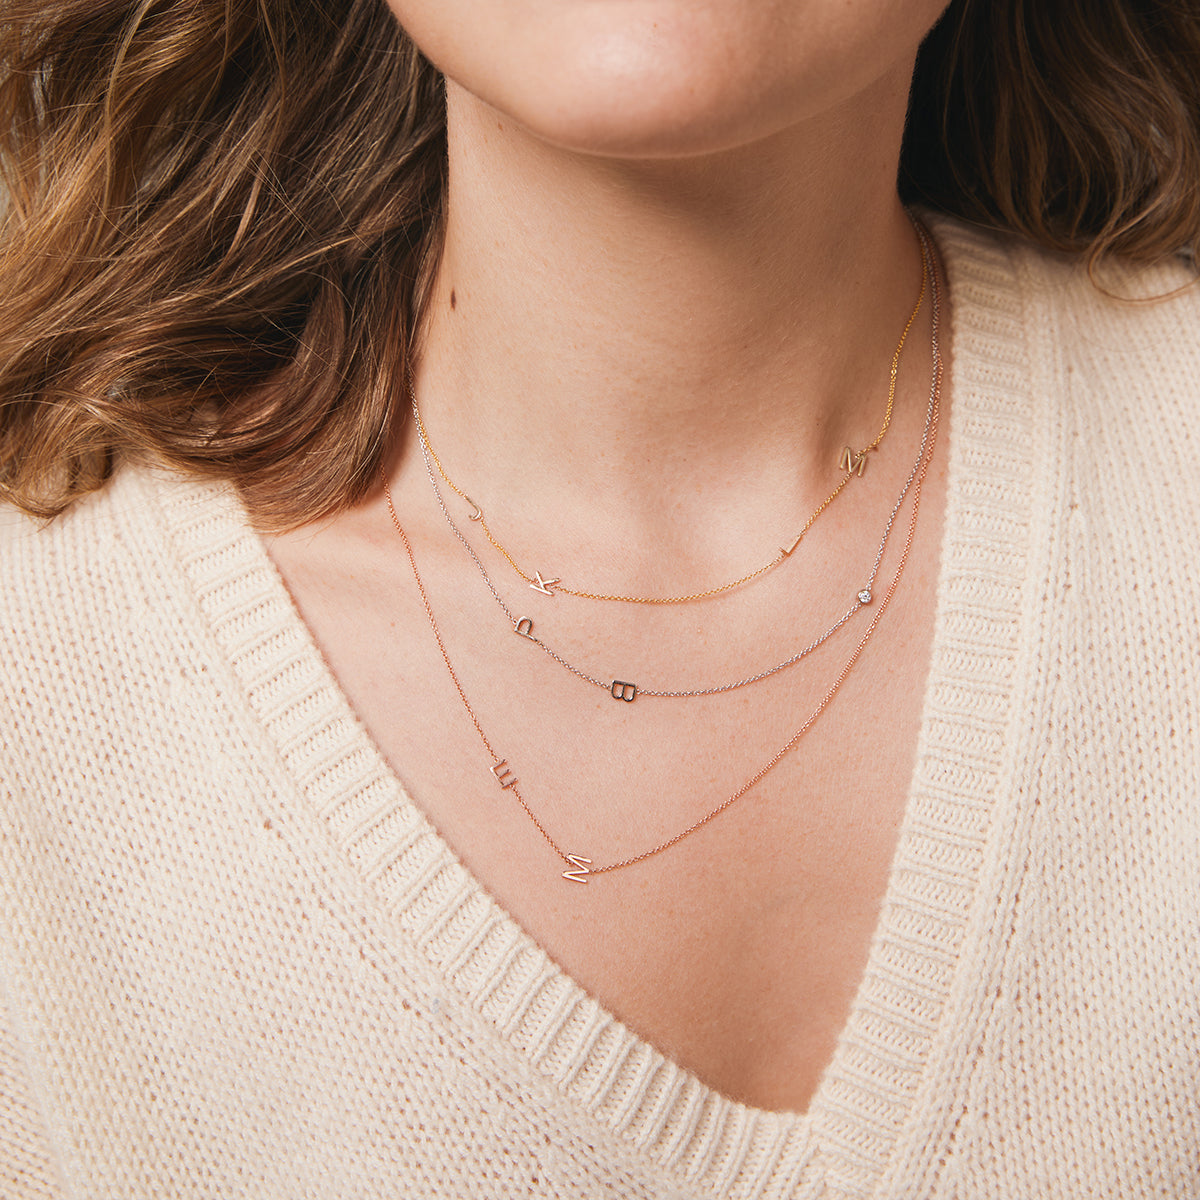 Necklace Separator for Layered Necklaces  Layered necklaces, Floating  earrings, Gold necklace layered